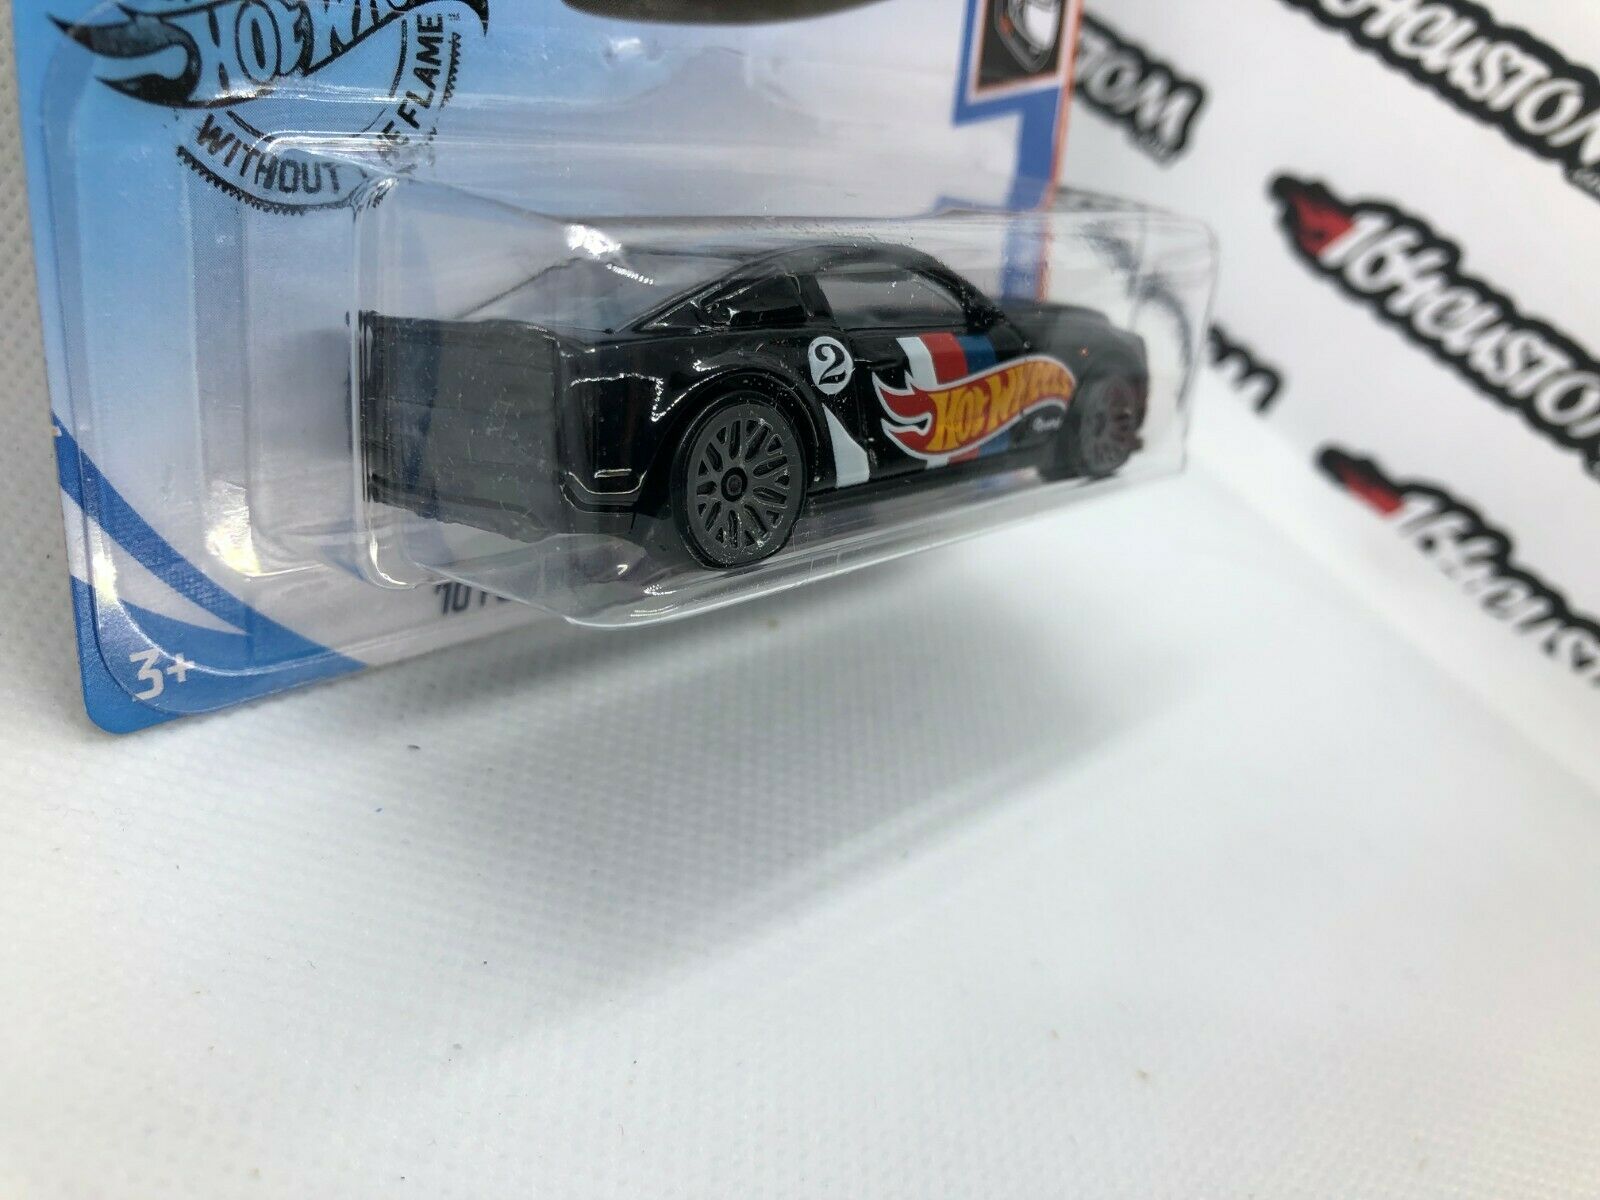 '10 Ford Shelby GT500 Super Snake Hot Wheels